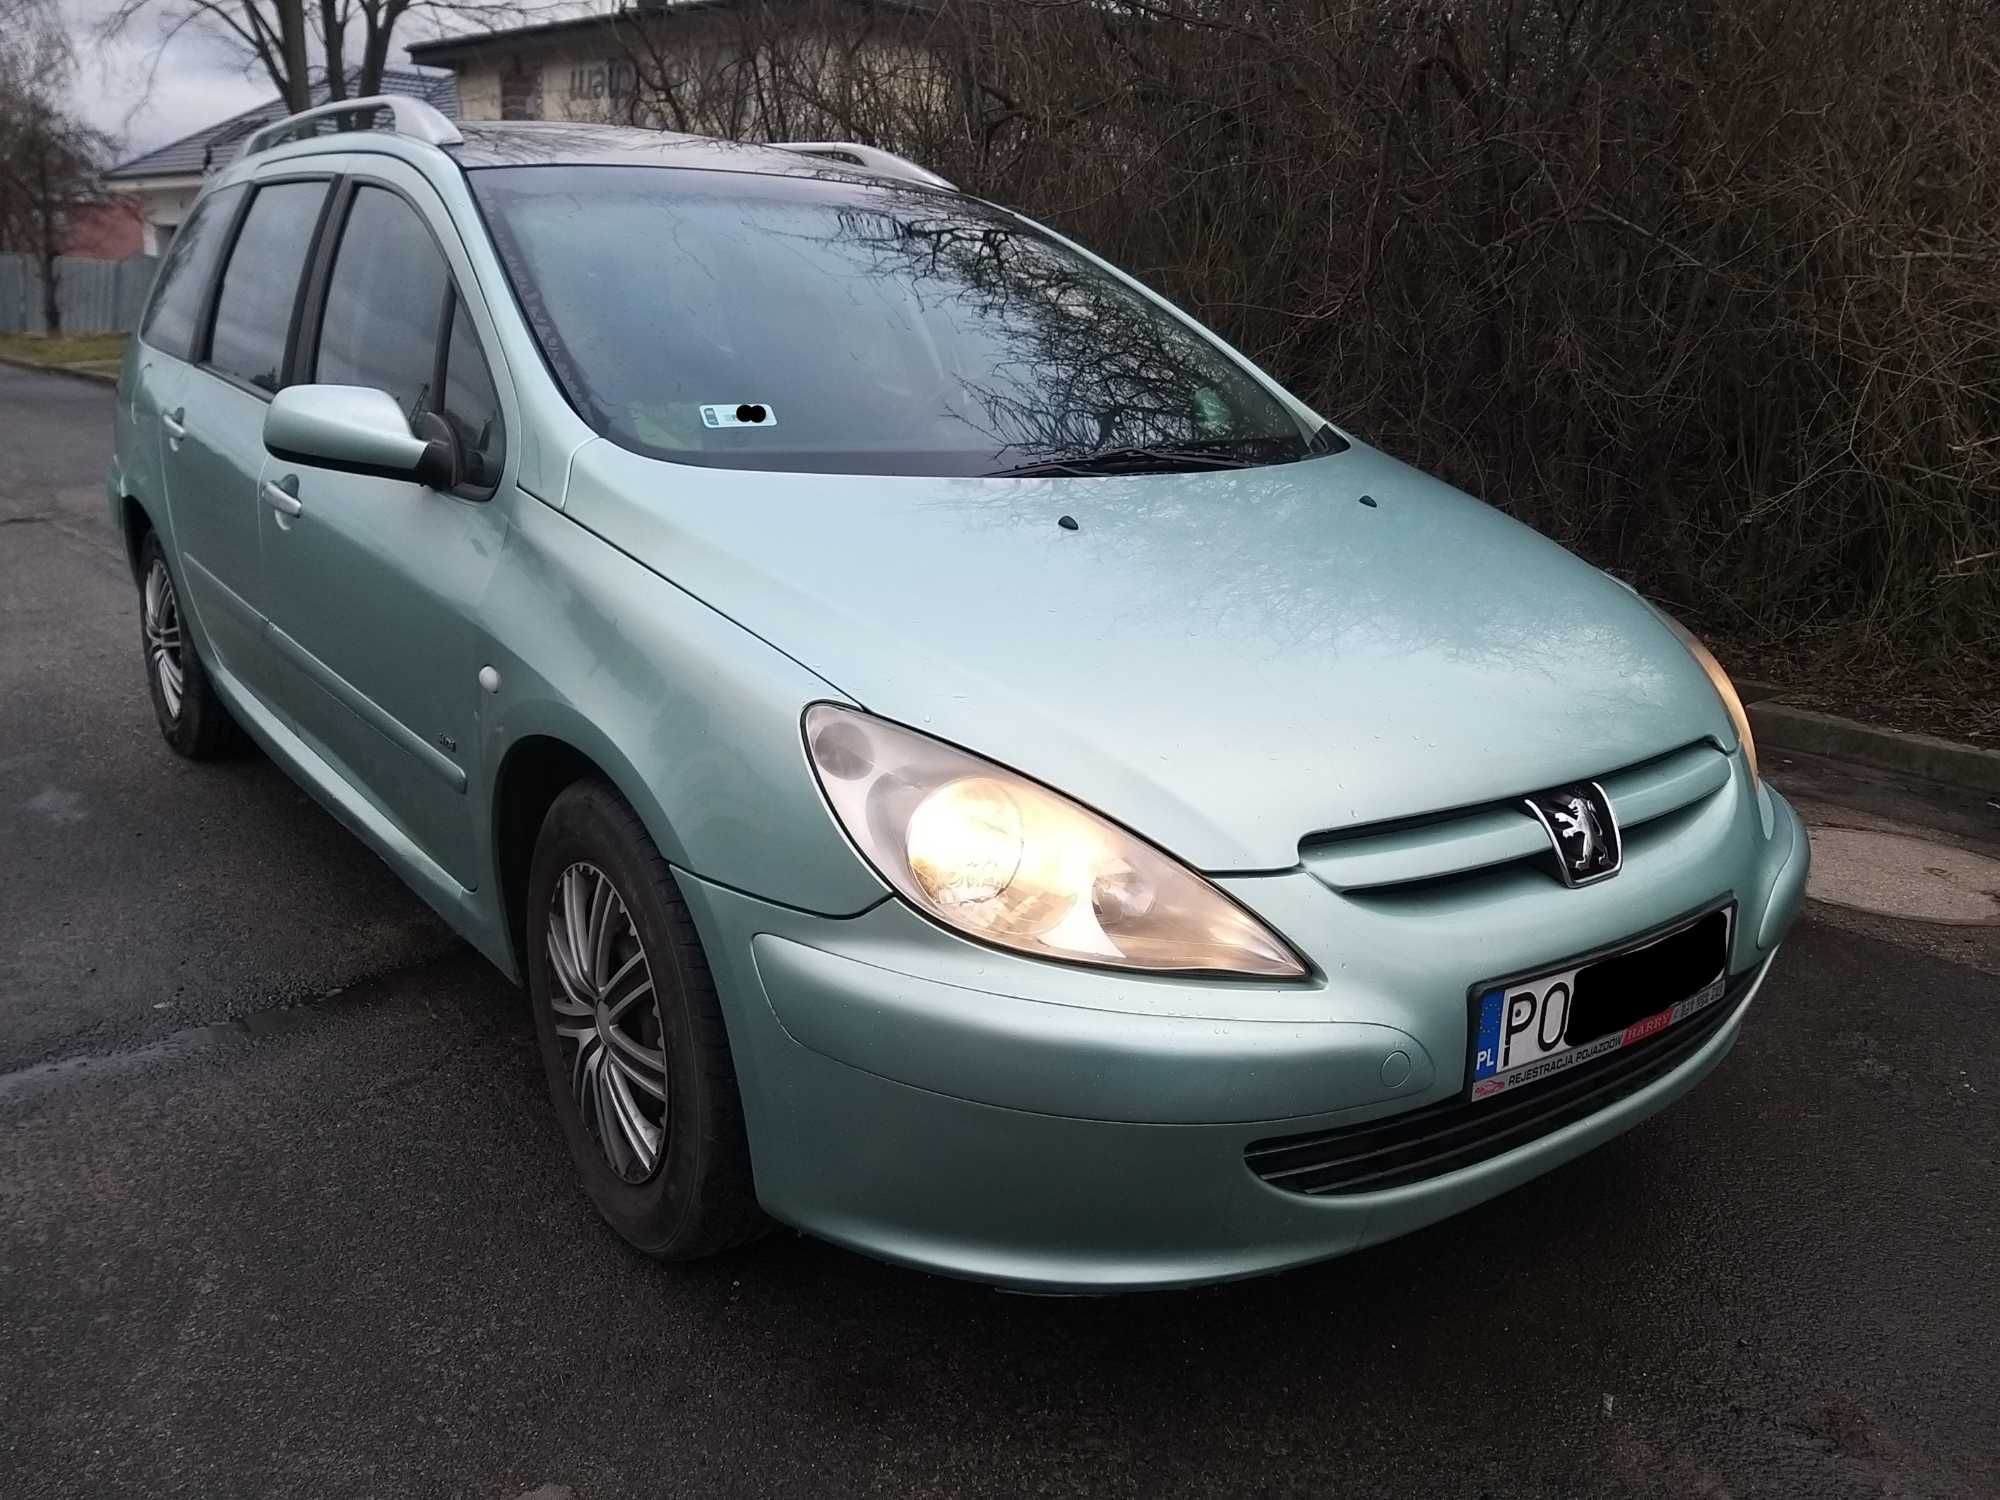 Peugeot 307 SW 1.6 hdi 7 osobowy Panoramiczny dach 2004 rok